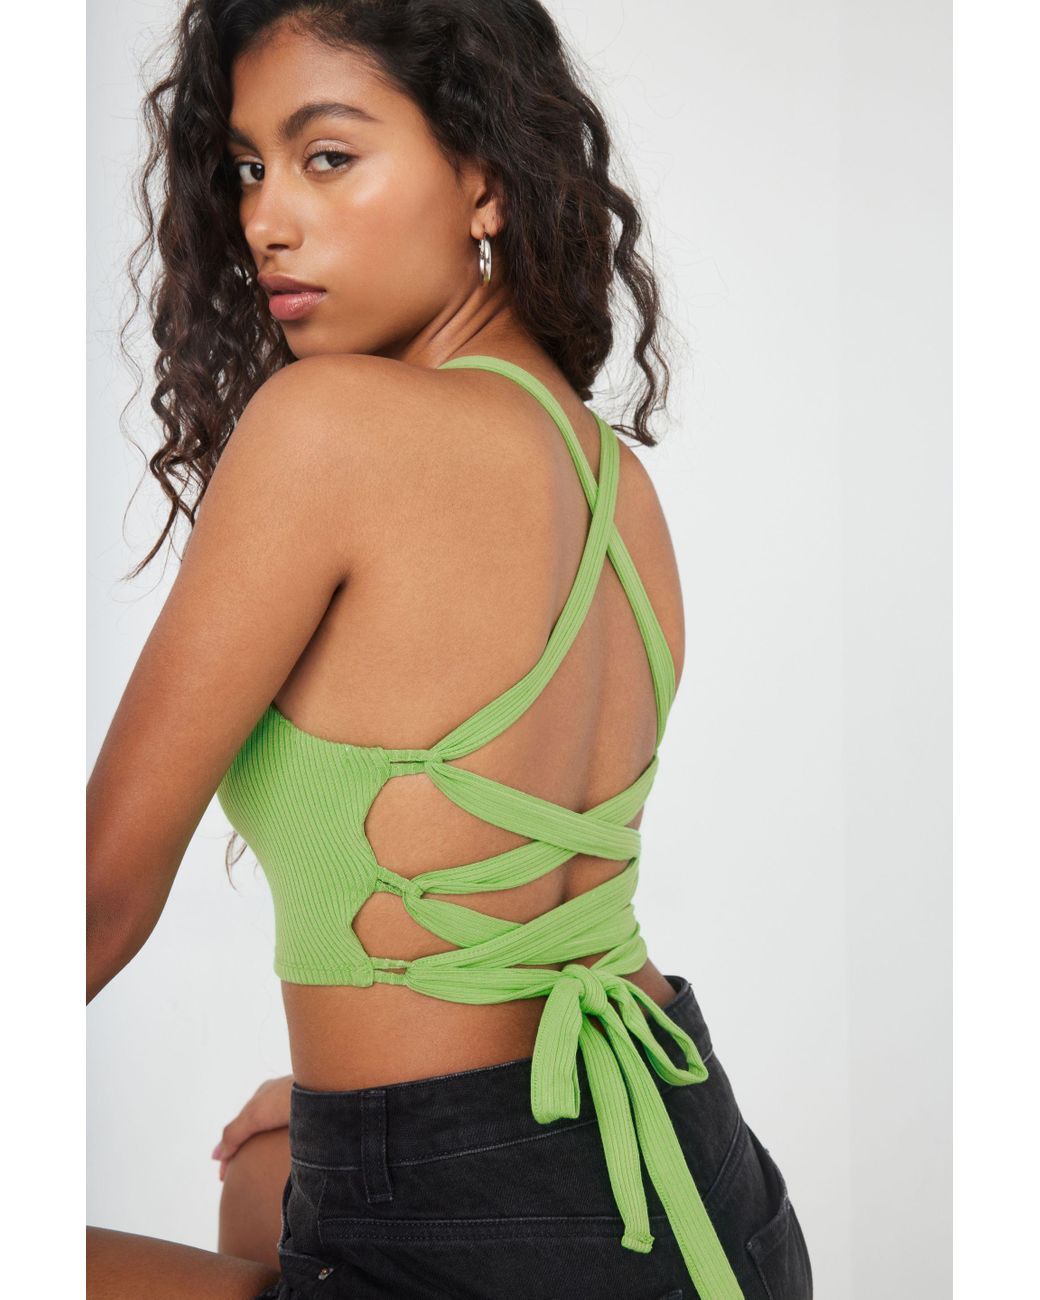 Garage Tia Lace Up Top in Green | Lyst